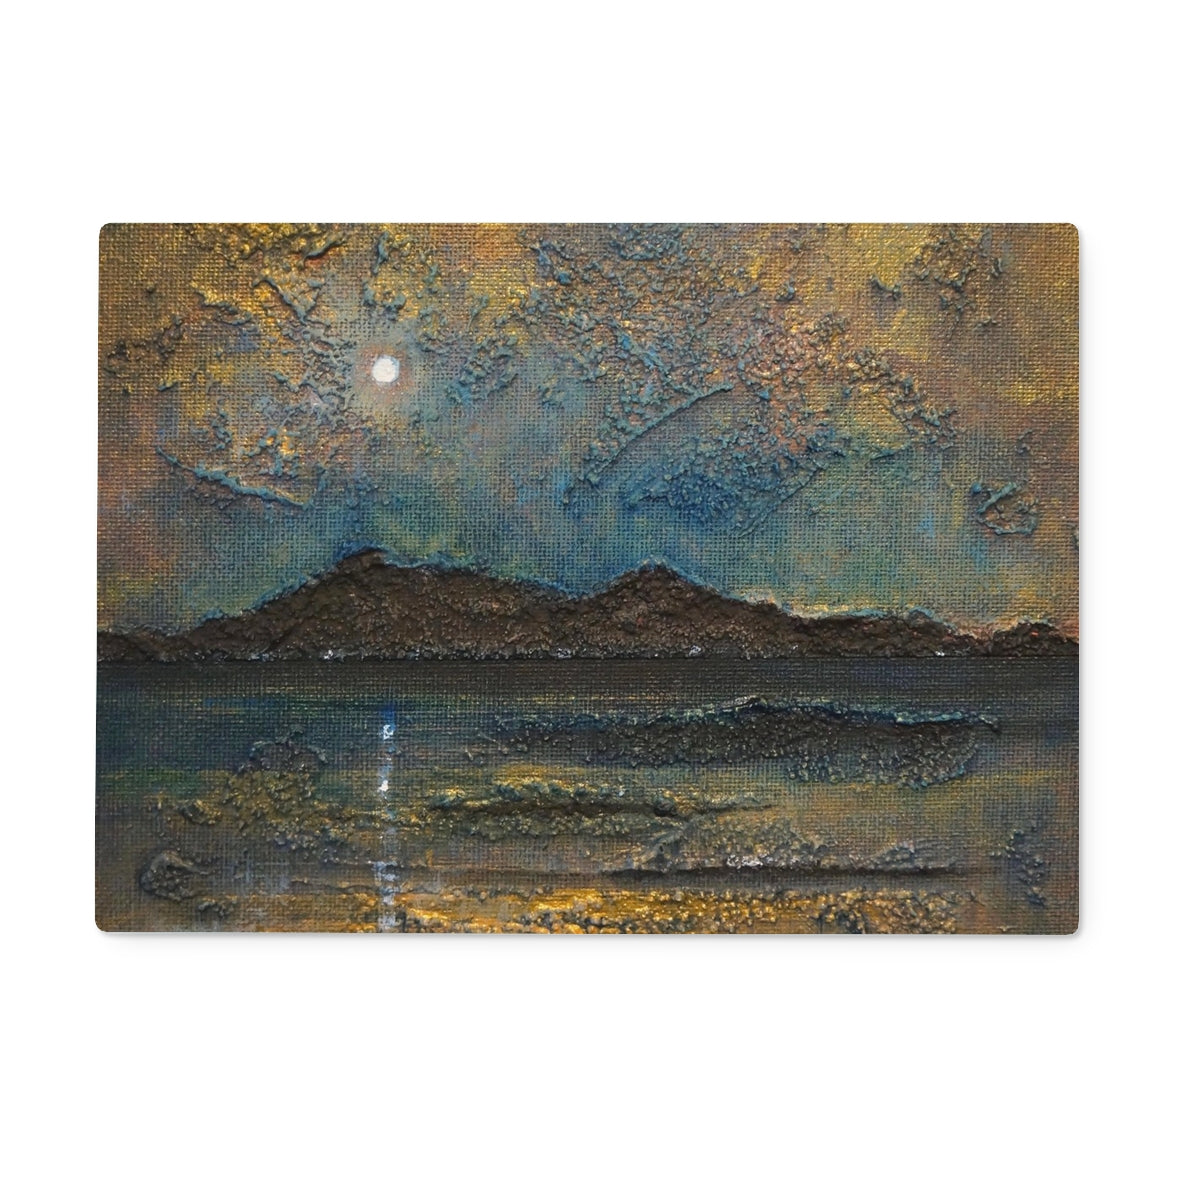 Arran Moonlight Art Gifts Glass Chopping Board-Glass Chopping Boards-Arran Art Gallery-15"x11" Rectangular-Paintings, Prints, Homeware, Art Gifts From Scotland By Scottish Artist Kevin Hunter